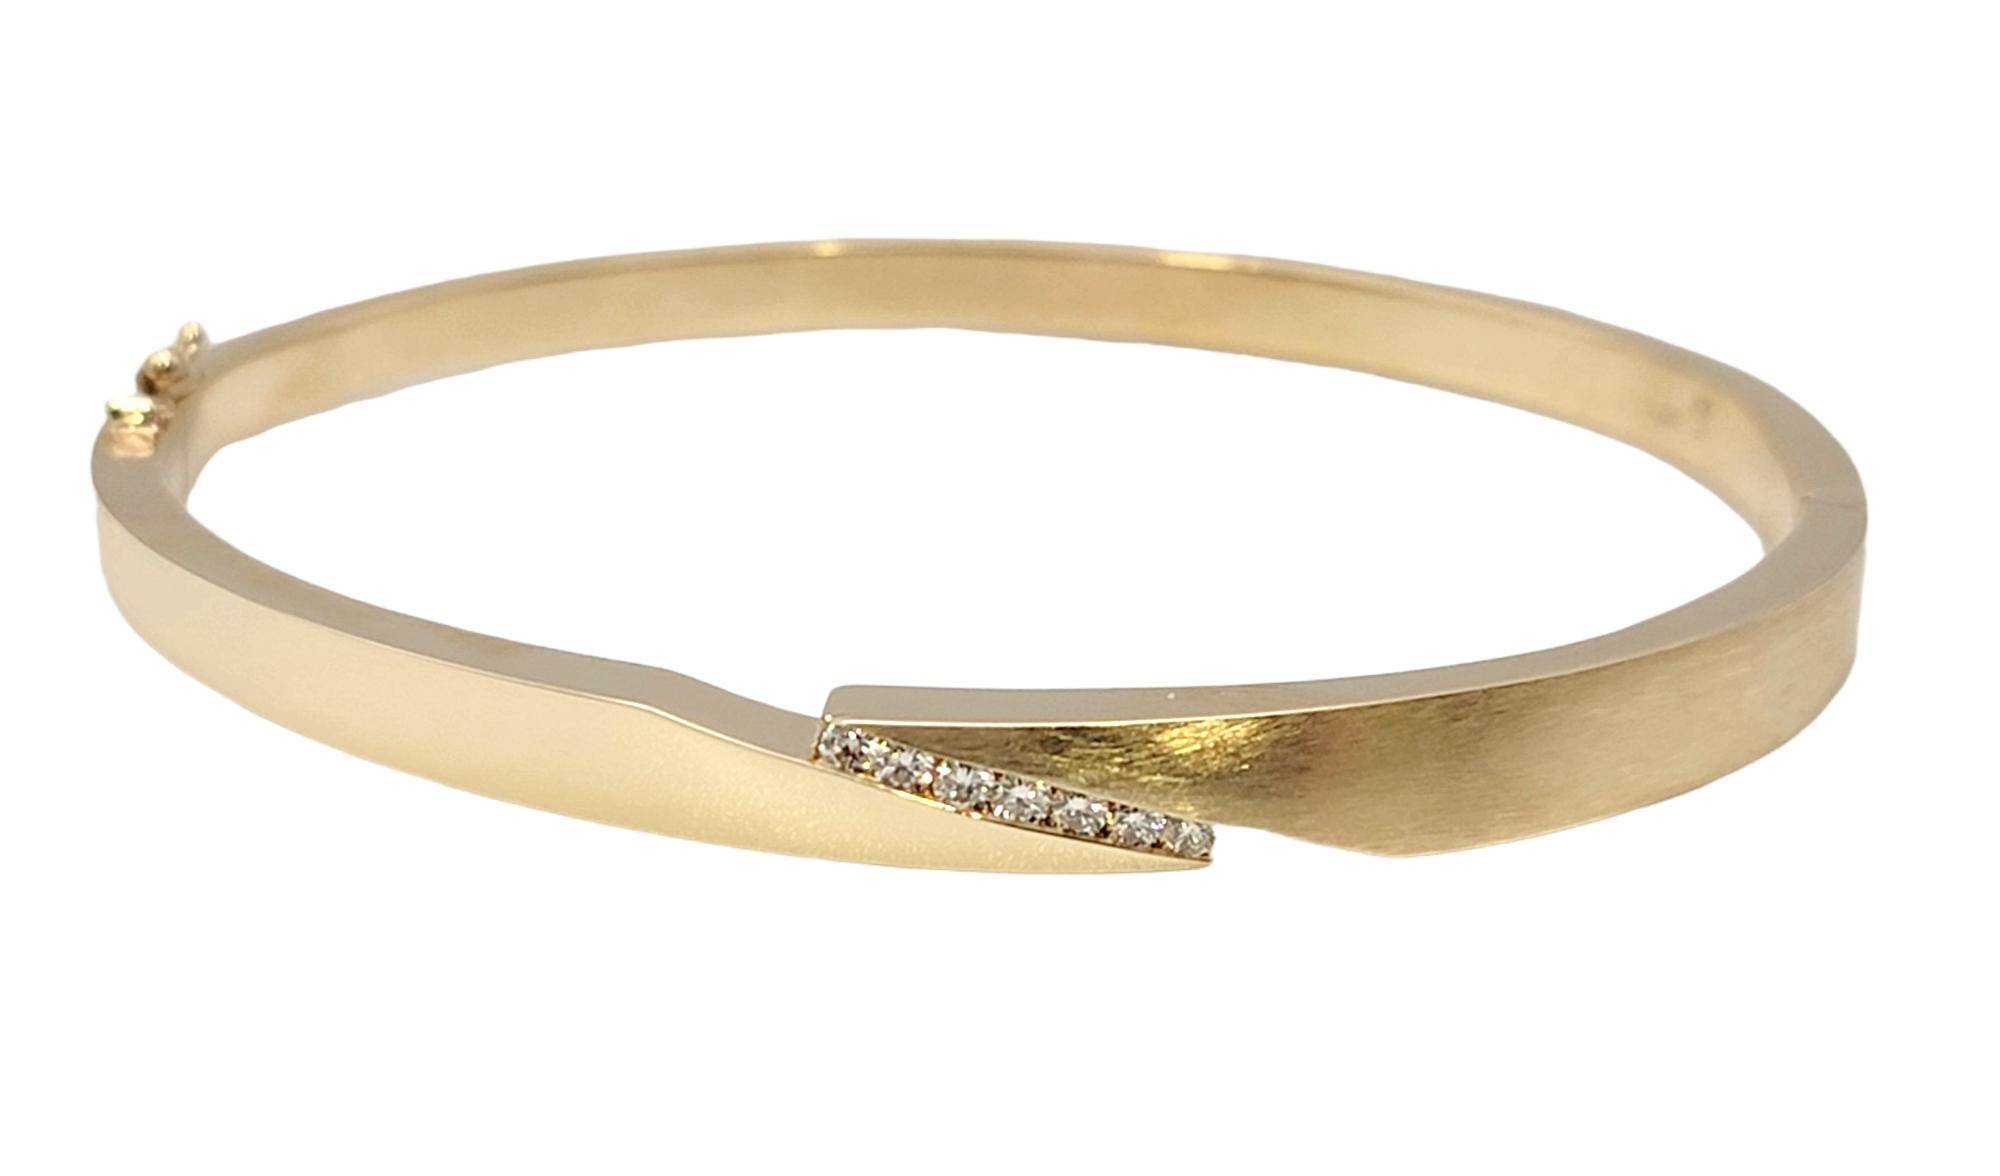 This sleek, contemporary bangle bracelet is effortlessly elegant and absolutely gorgeous. Featuring both polished and brushed yellow gold and a single row of diamonds at the center, this modern beauty is simple enough for everyday wear, yet special